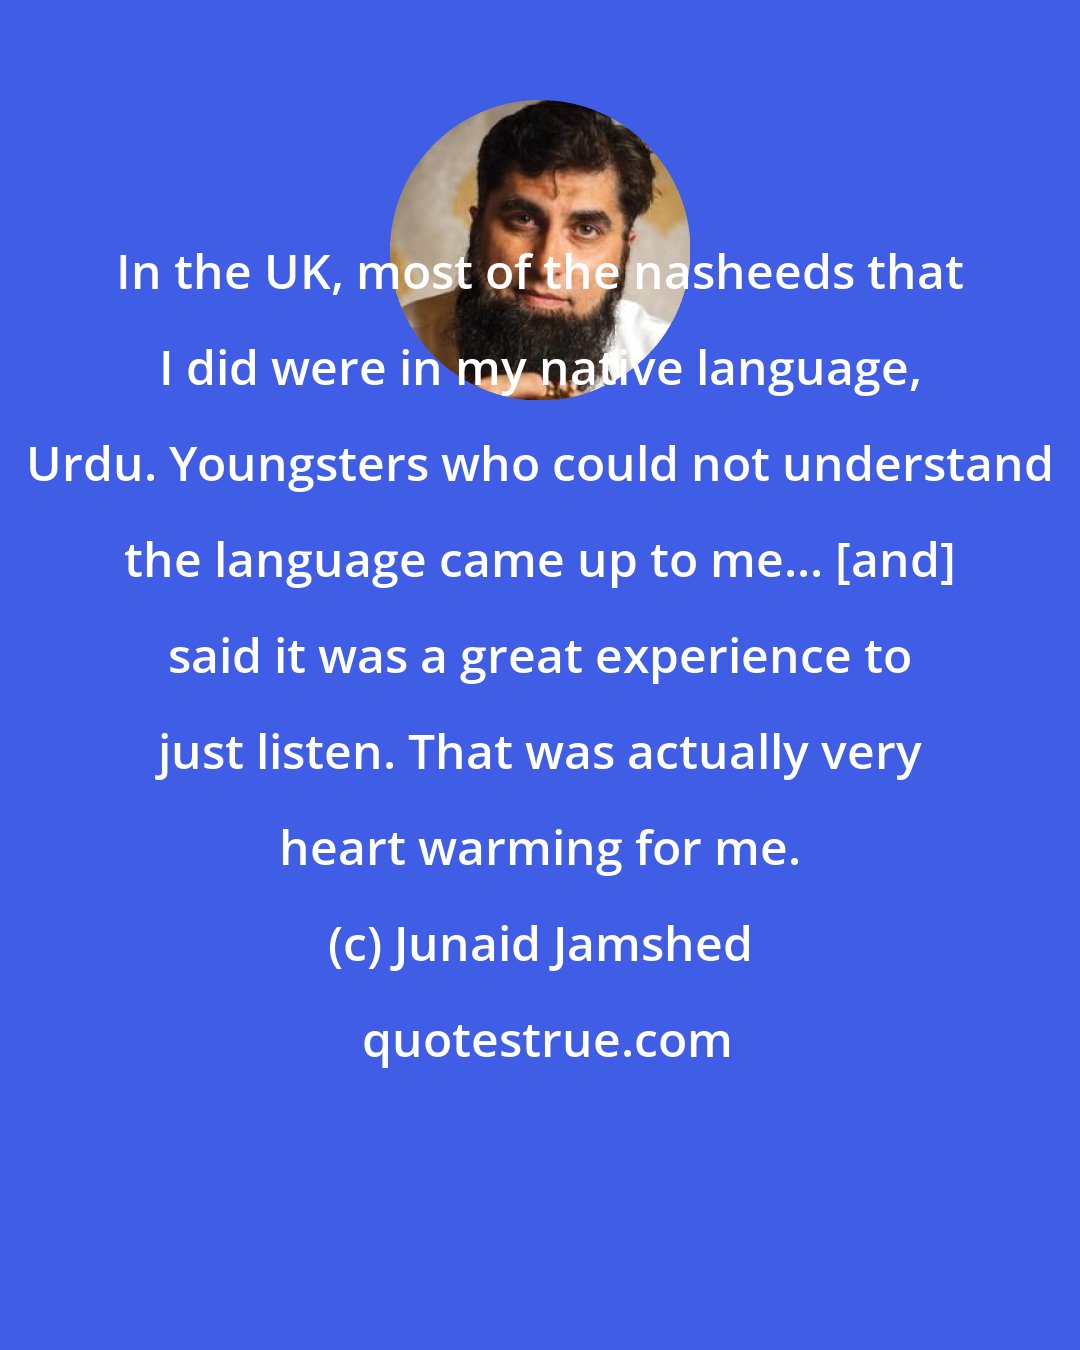 Junaid Jamshed: In the UK, most of the nasheeds that I did were in my native language, Urdu. Youngsters who could not understand the language came up to me... [and] said it was a great experience to just listen. That was actually very heart warming for me.